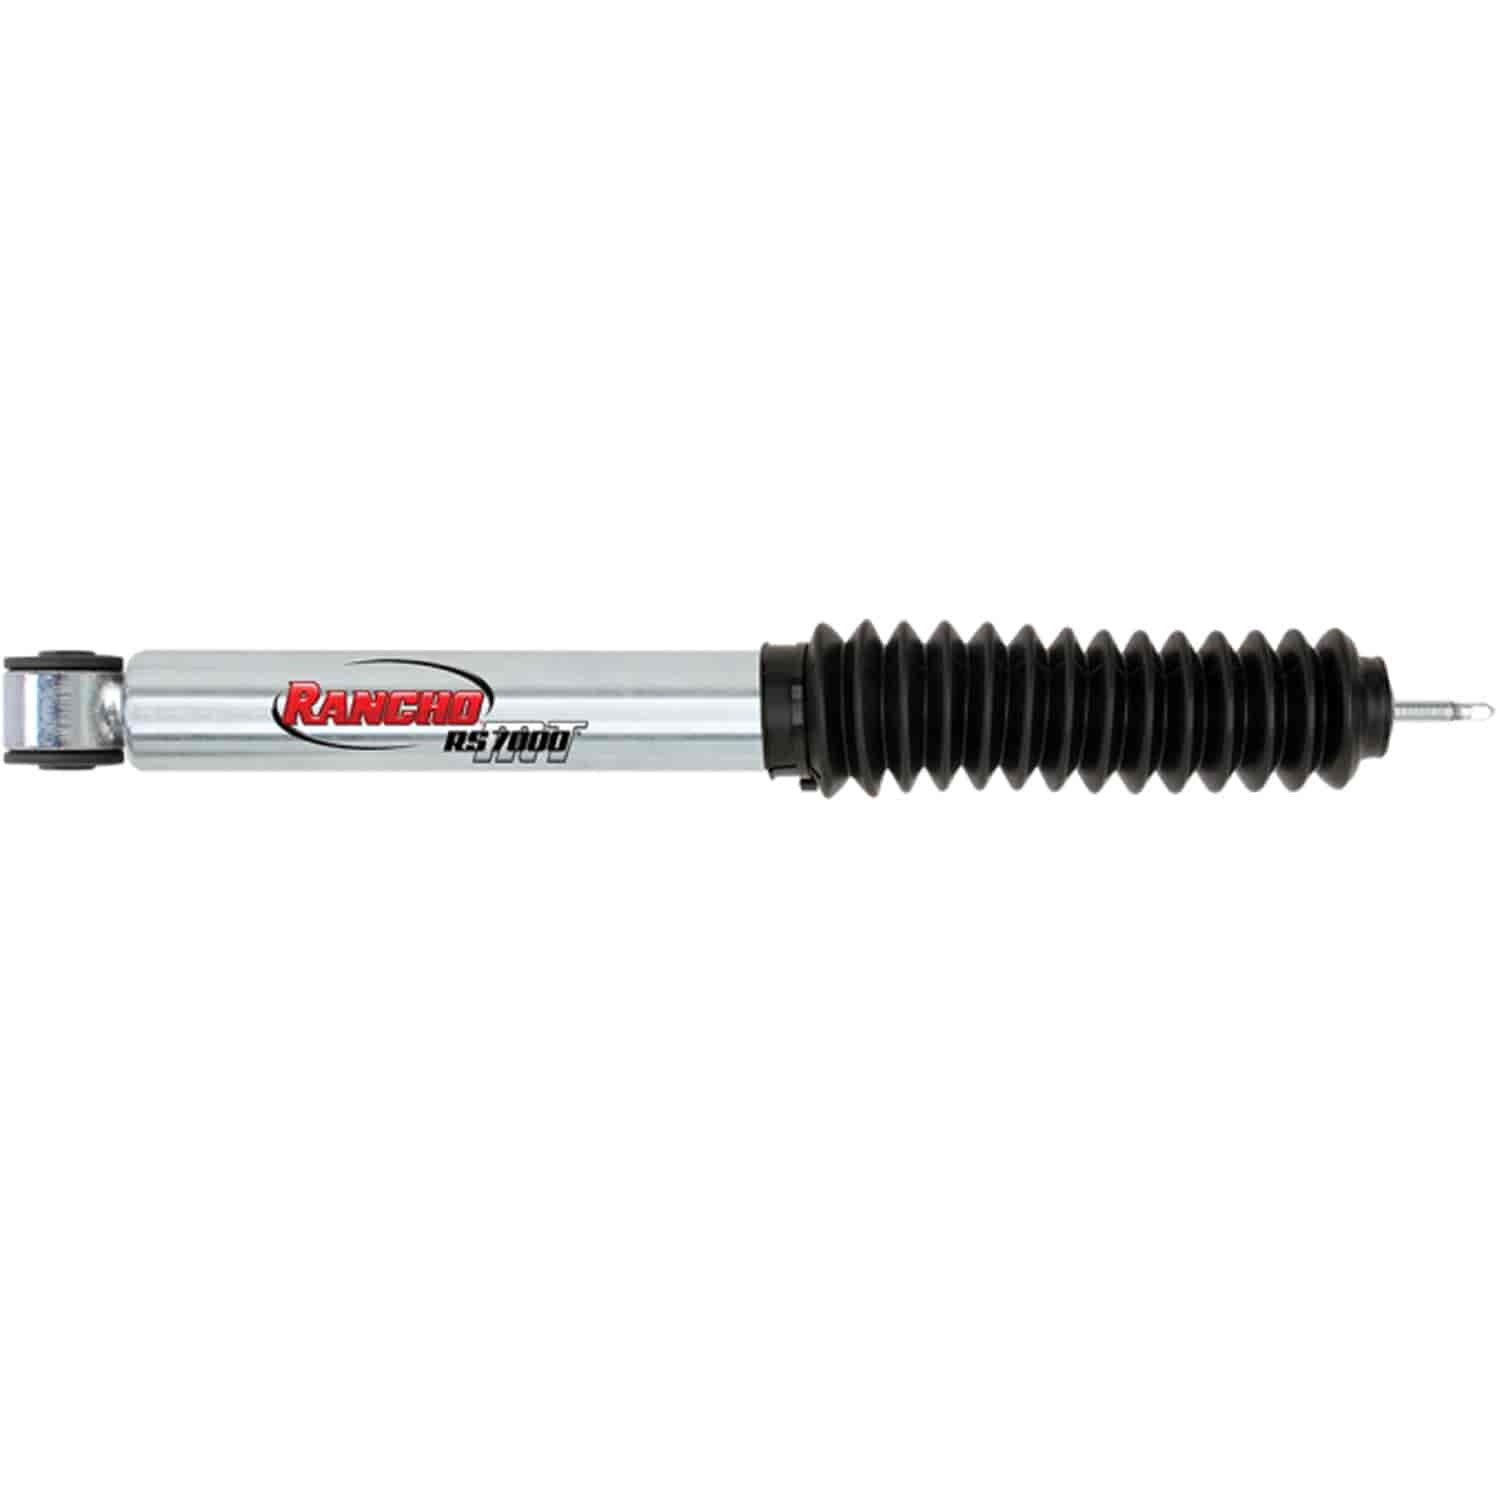 RS7000MT Front Shock Fits Jeep Wrangler YJ